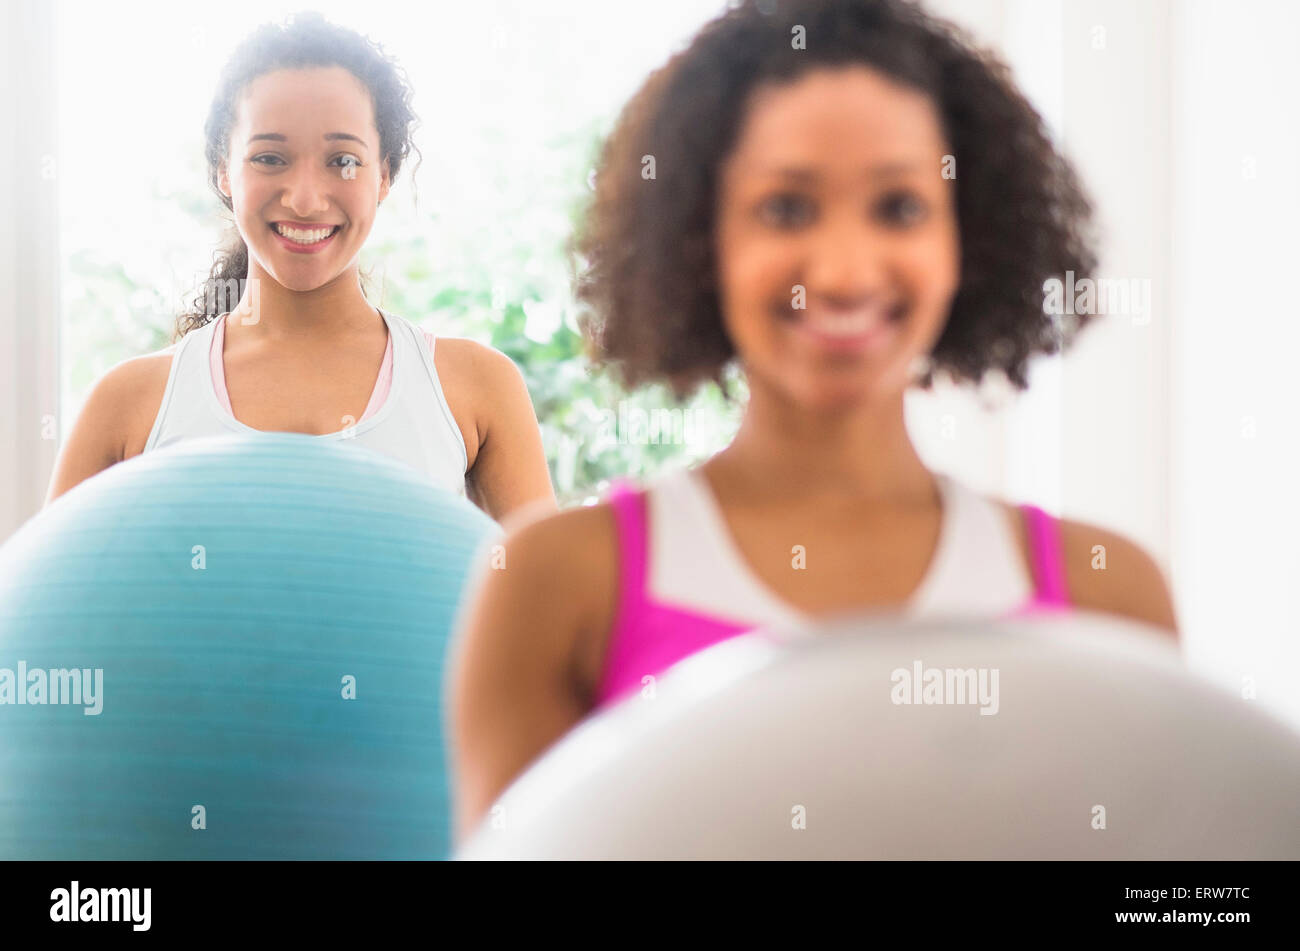 Women working out with fitness balls in exercise class Stock Photo